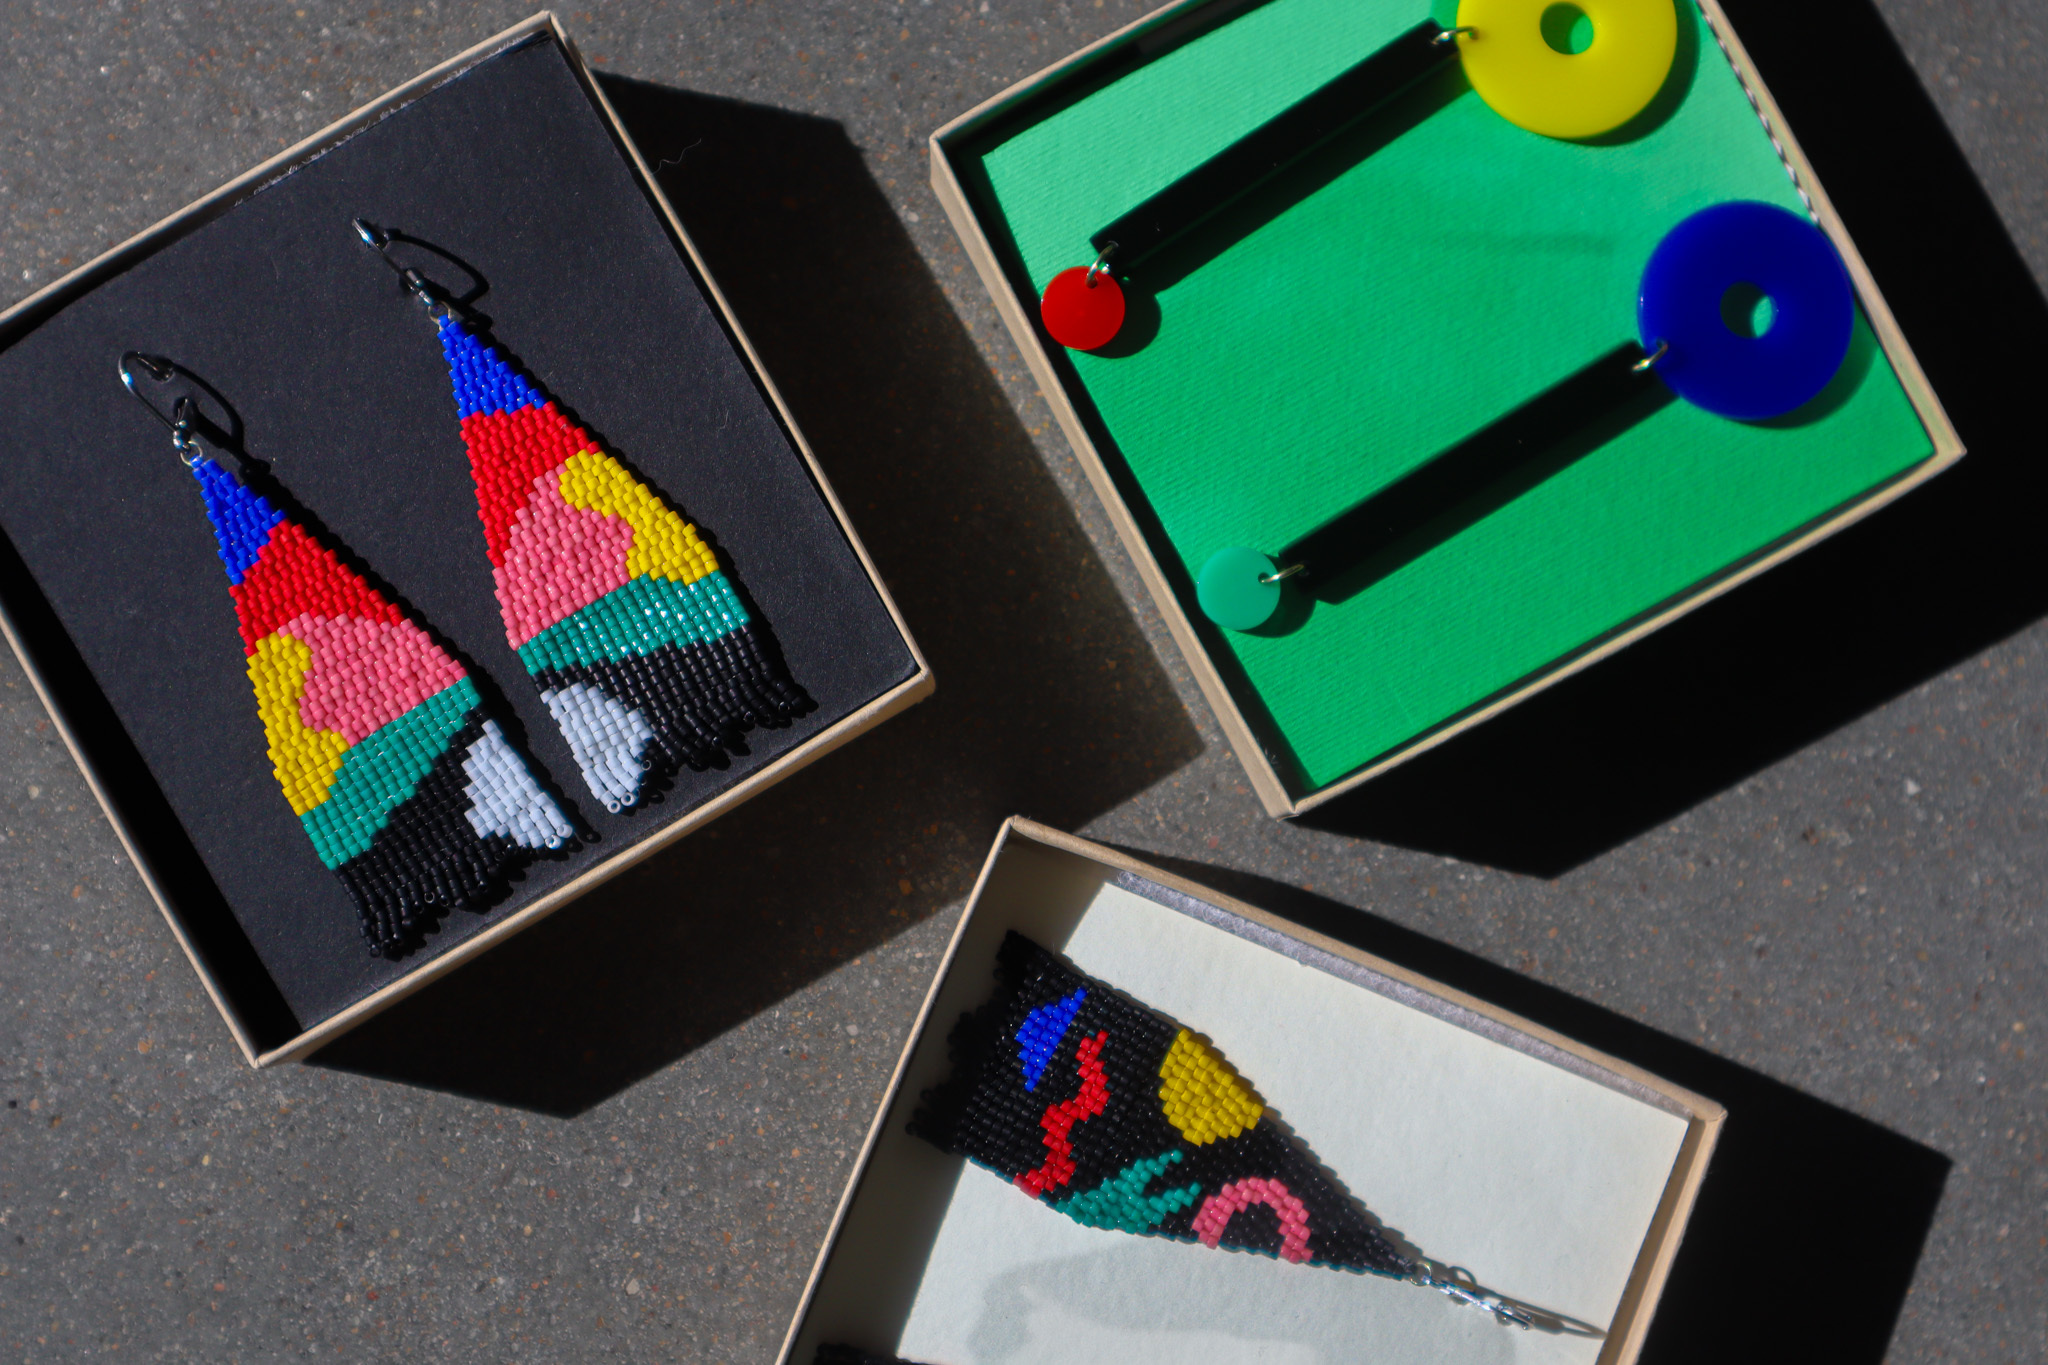 Three pairs of earrings in wooden boxes sit on a cement surface. Two are out of frame; the one pair in frame is a dangling set of earrings on a black background. They are abstract shaped colors of yellow, pink, green, blue, black and white